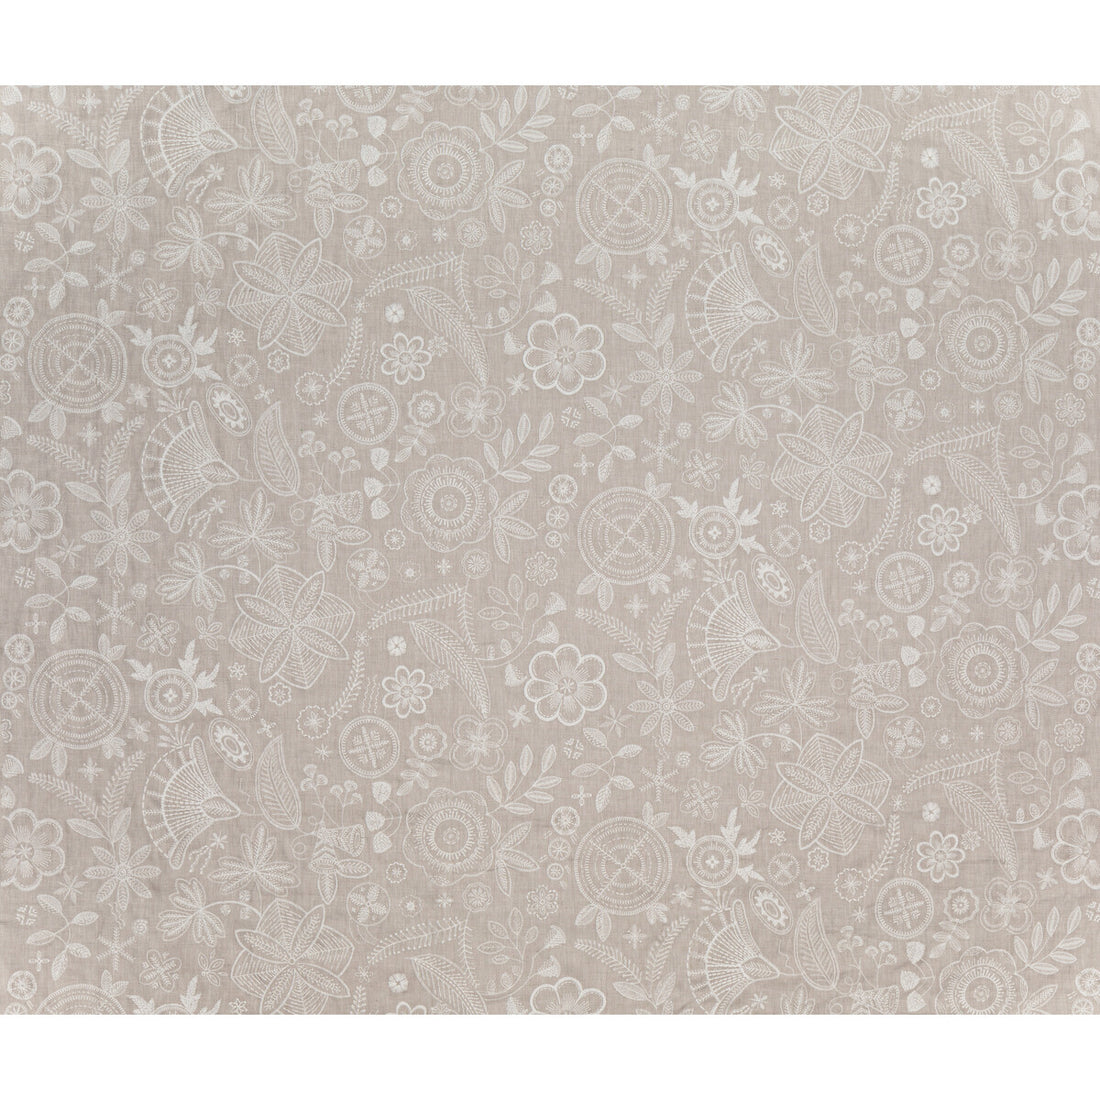 Eden fabric in natural color - pattern BFC-3711.16.0 - by Lee Jofa in the Blithfield Eden collection